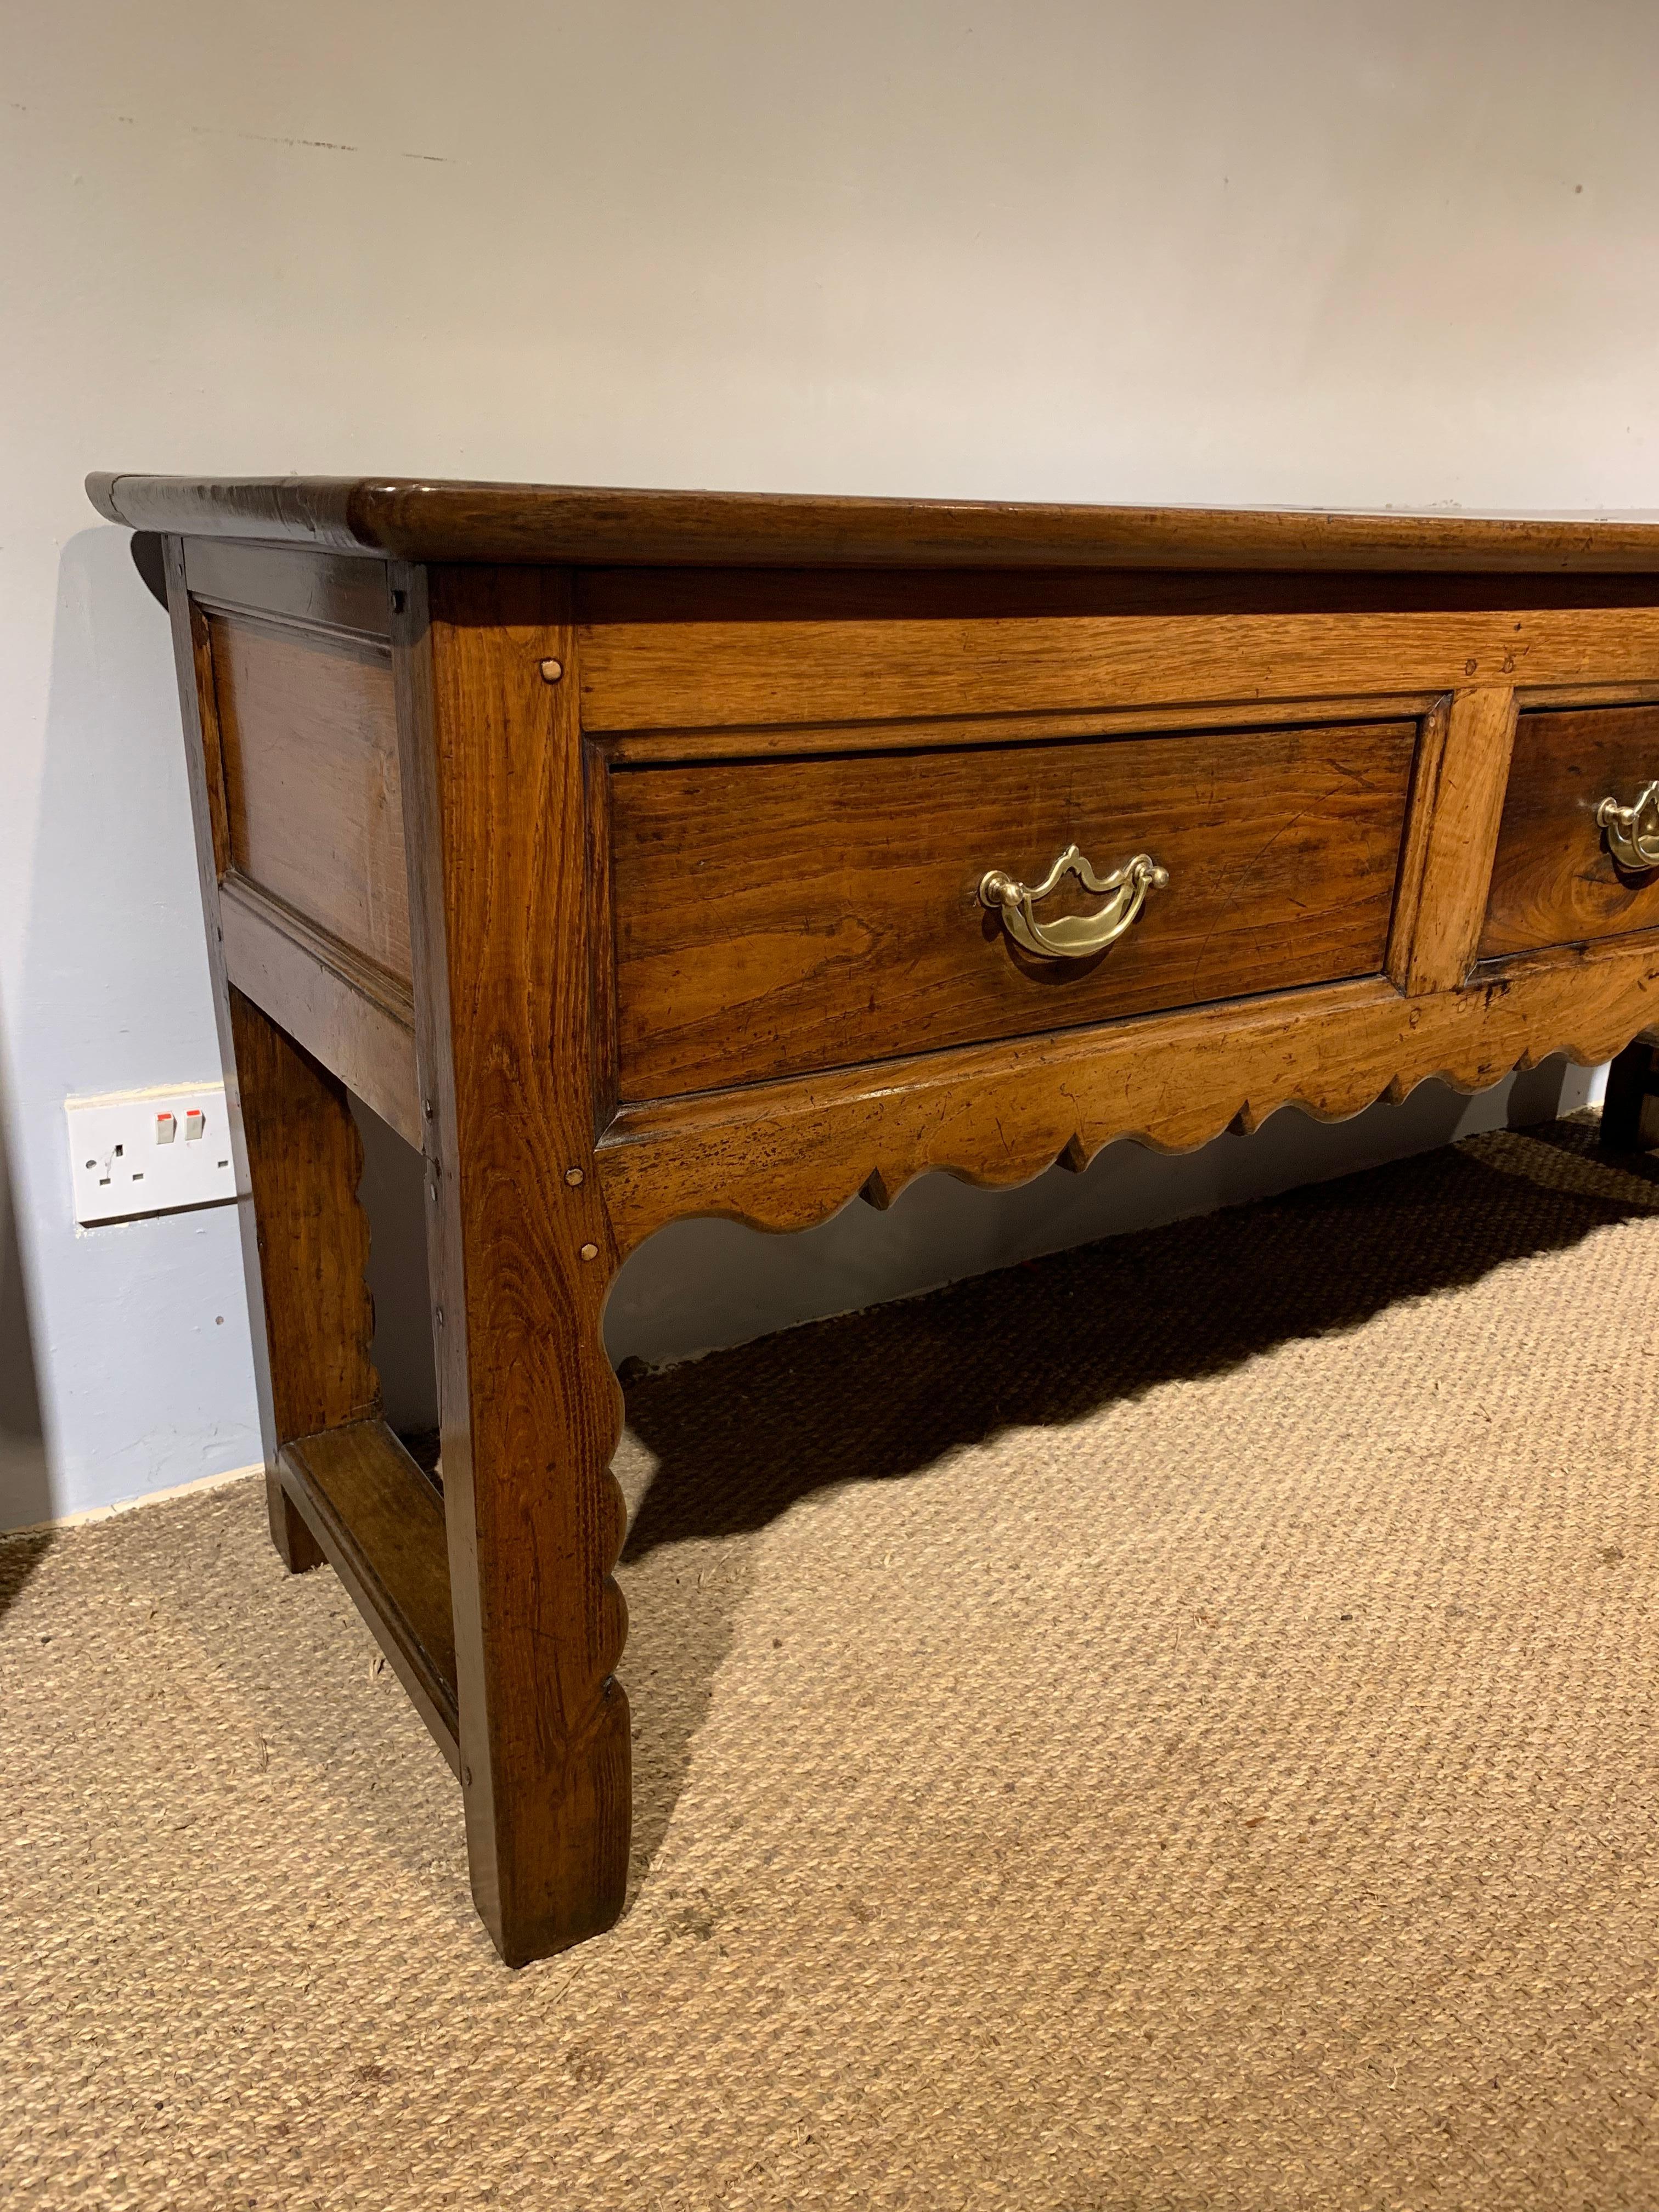 Fab early 19th century chestnut dresser base / server
From the Brittany area of France dating to around the 1840s
This piece has been through our workshops been cleaned and polished and is ready to be placed in your home
Later brass